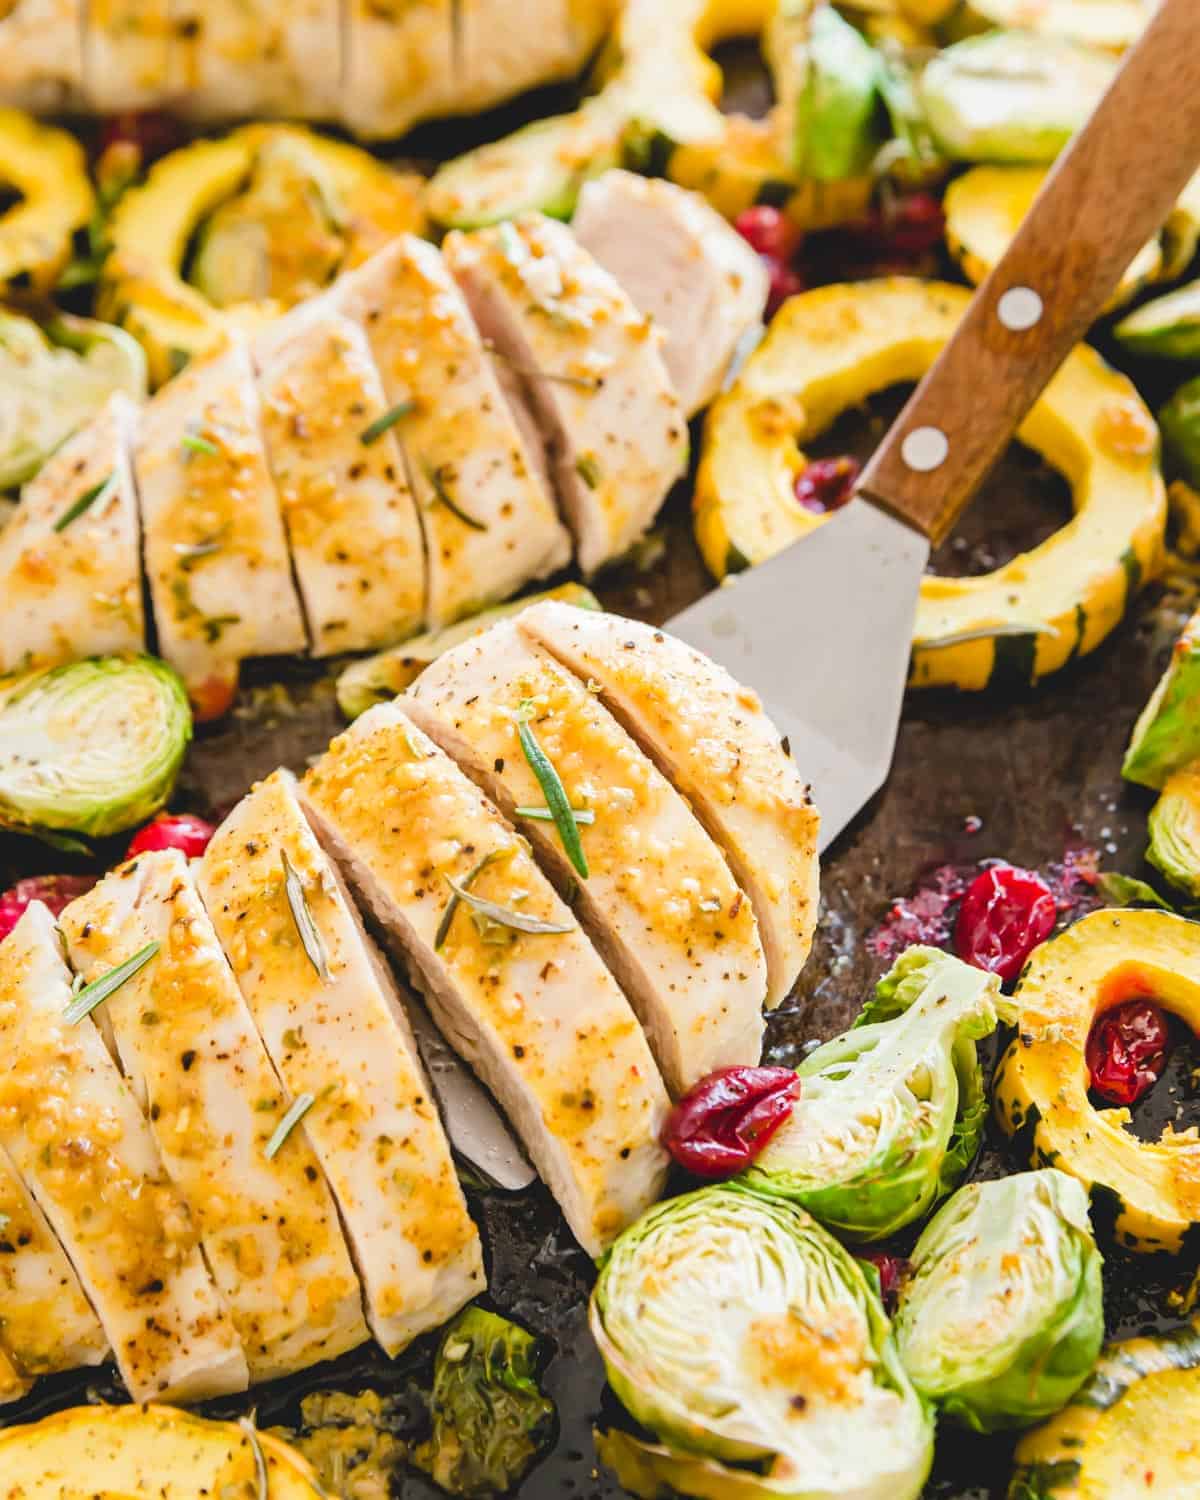 This simple dinner includes maple mustard chicken breasts along with Brussels sprouts, delicata squash and cranberries all baked together on one pan